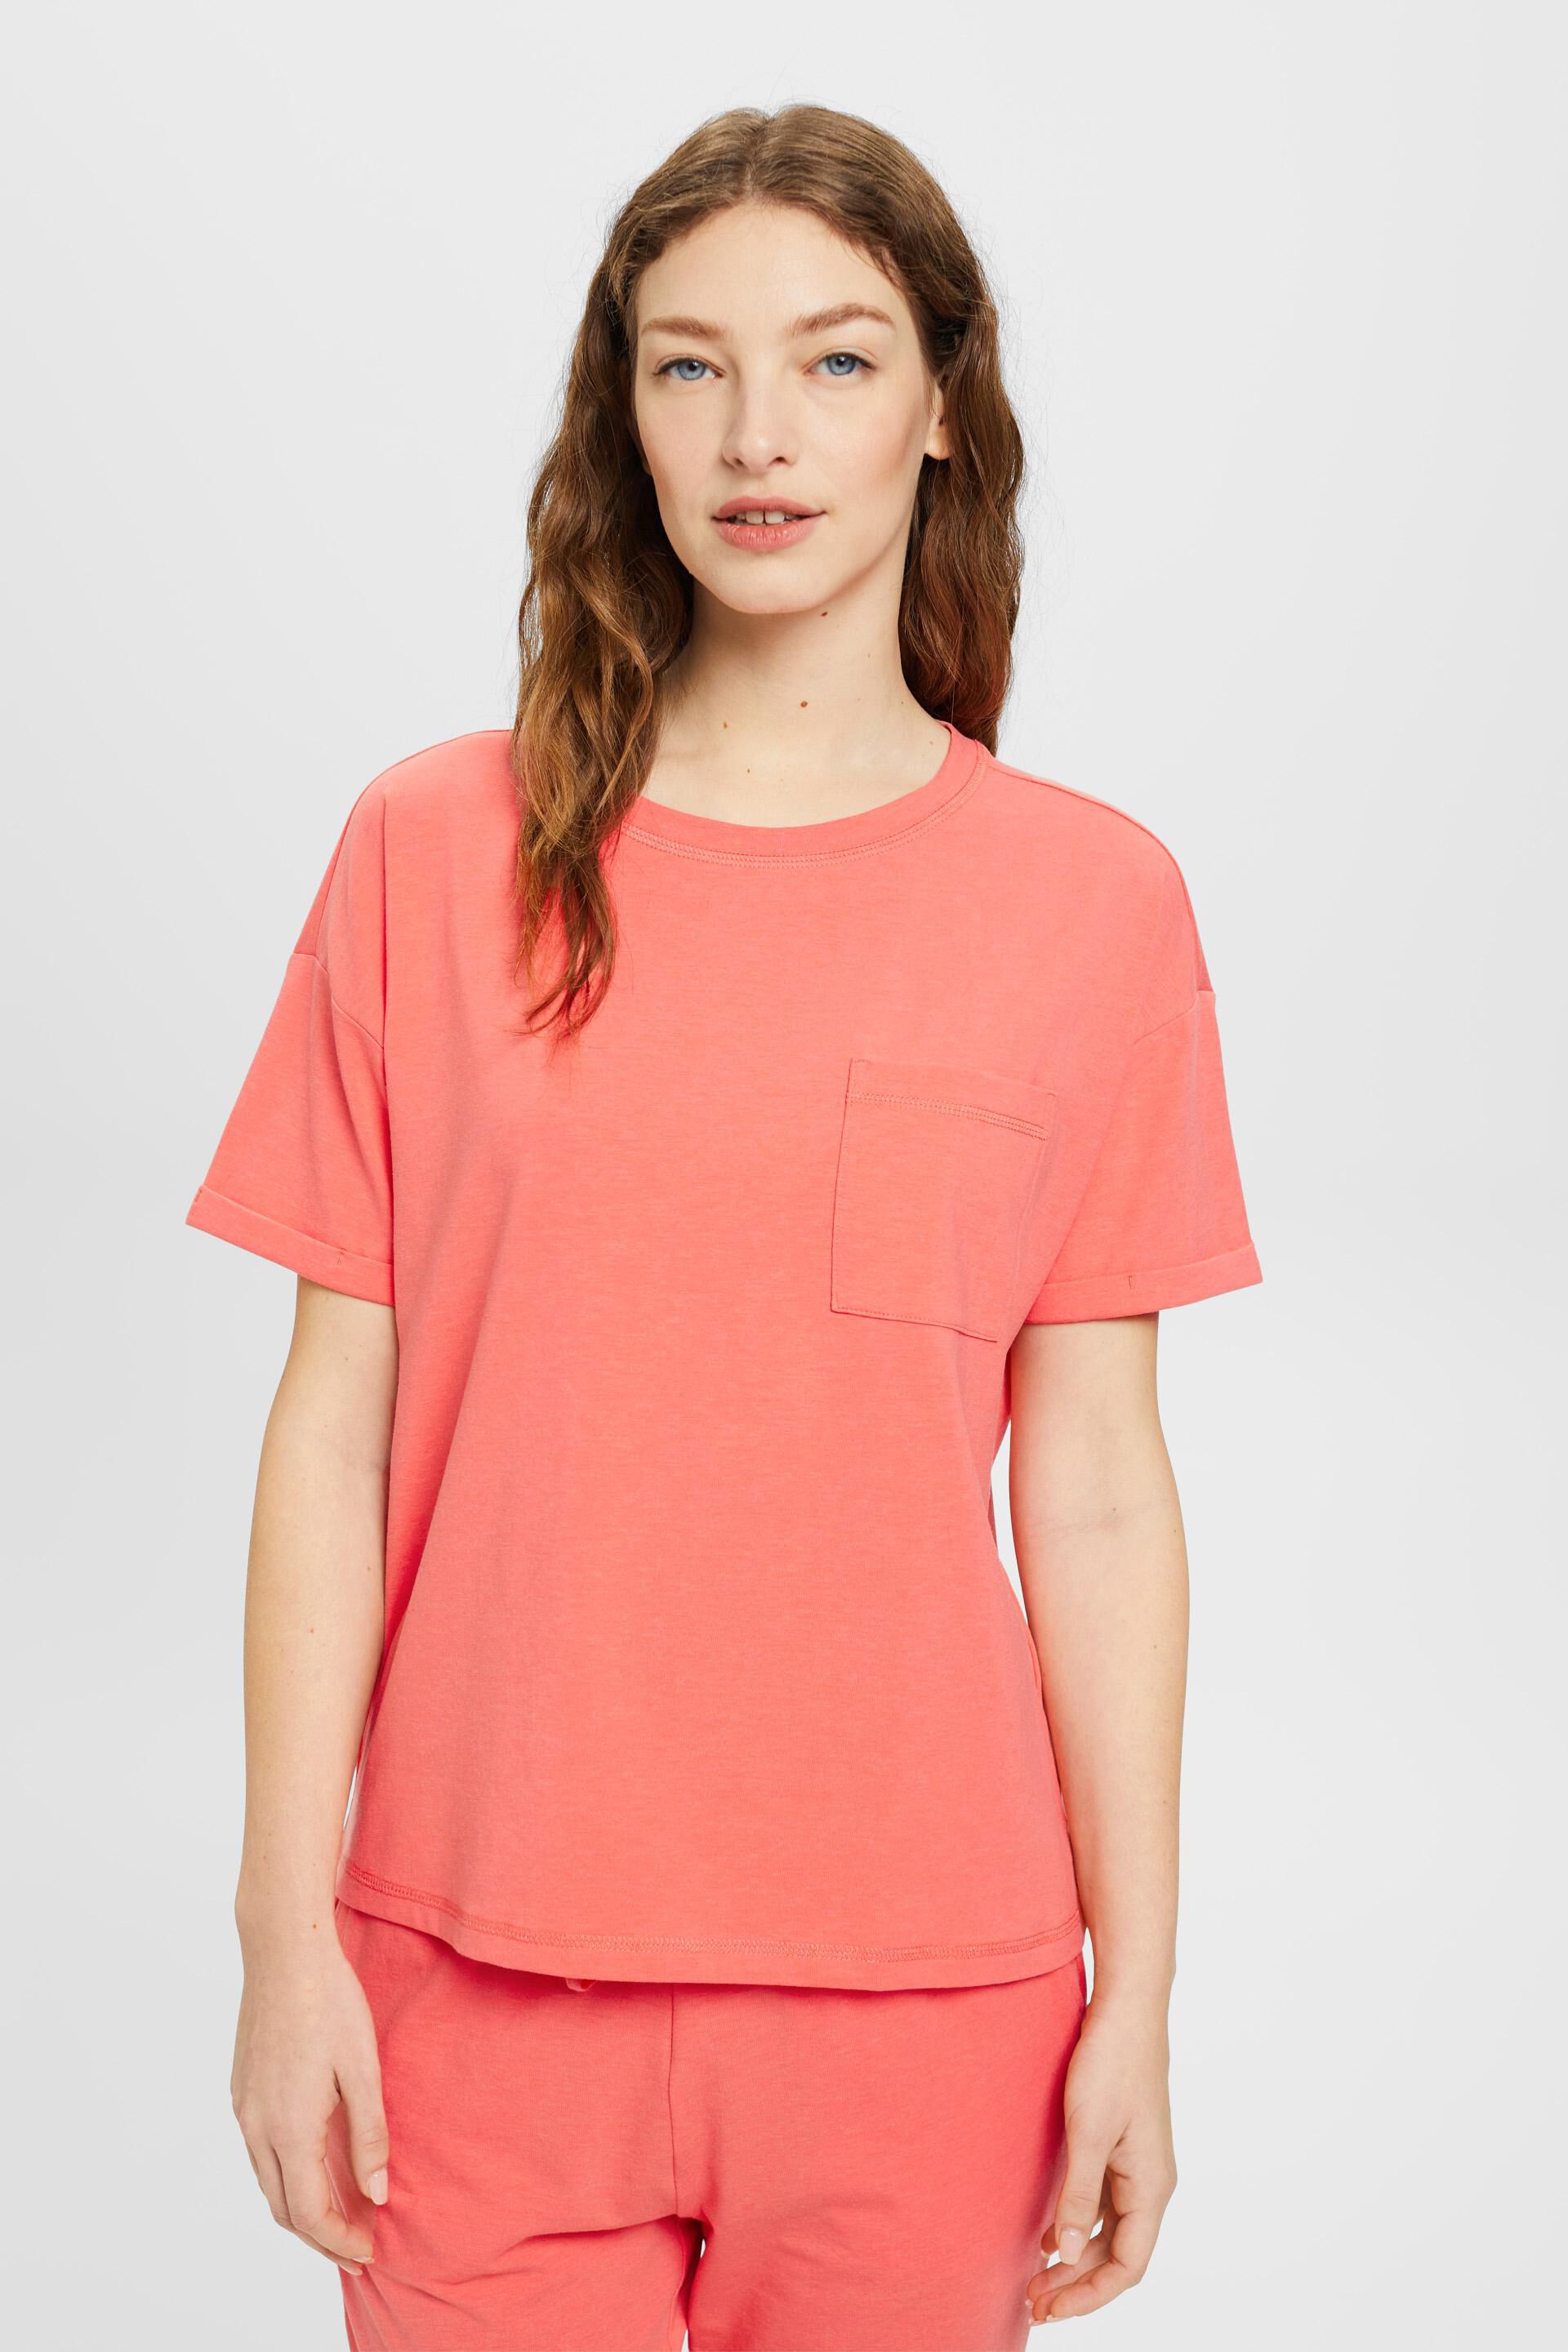 Esprit blended breast T-shirt in with a pocket cotton